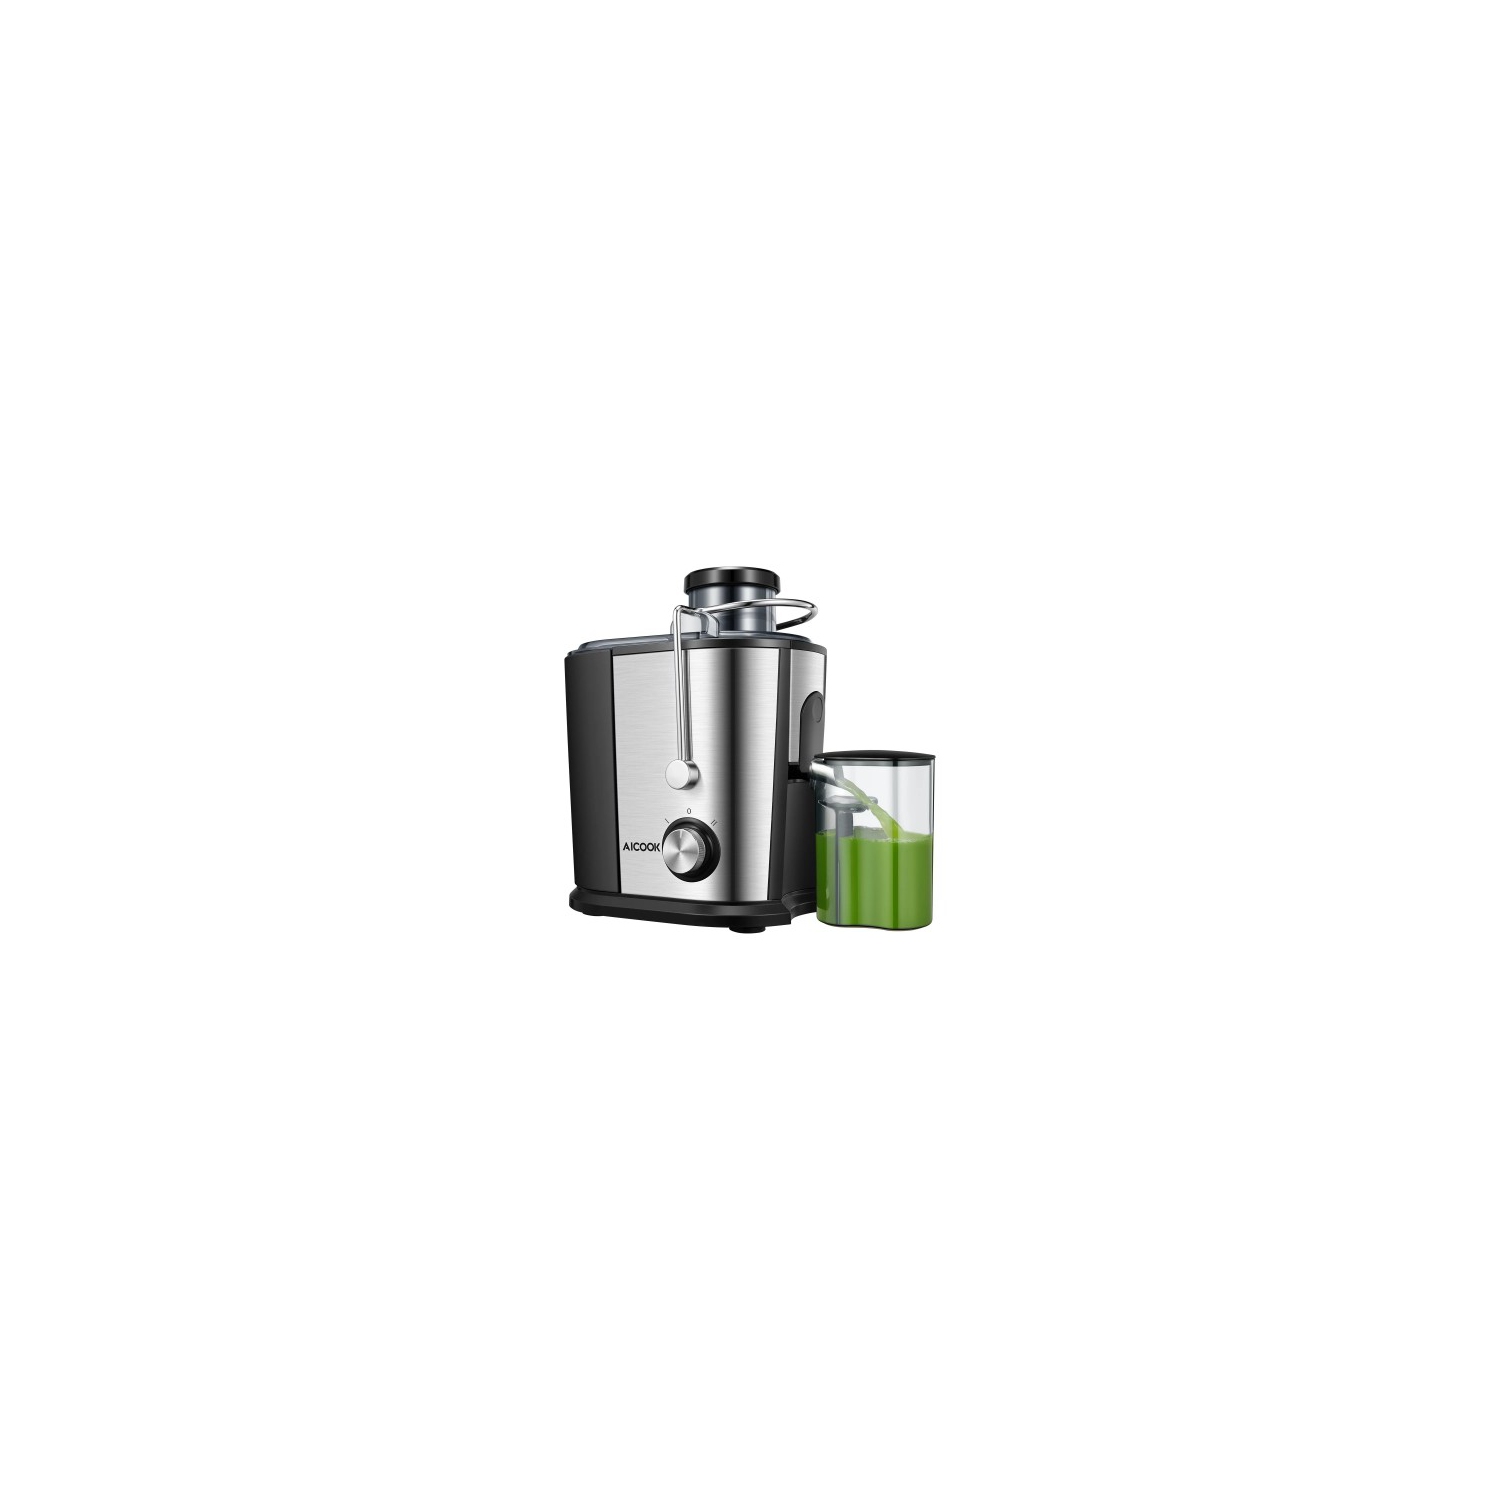 AICOOK 400W Dual-Speed Juicer 3 Inch Wide Mouth Stainless Steel Extractor for Whole Fruits, Vegetables